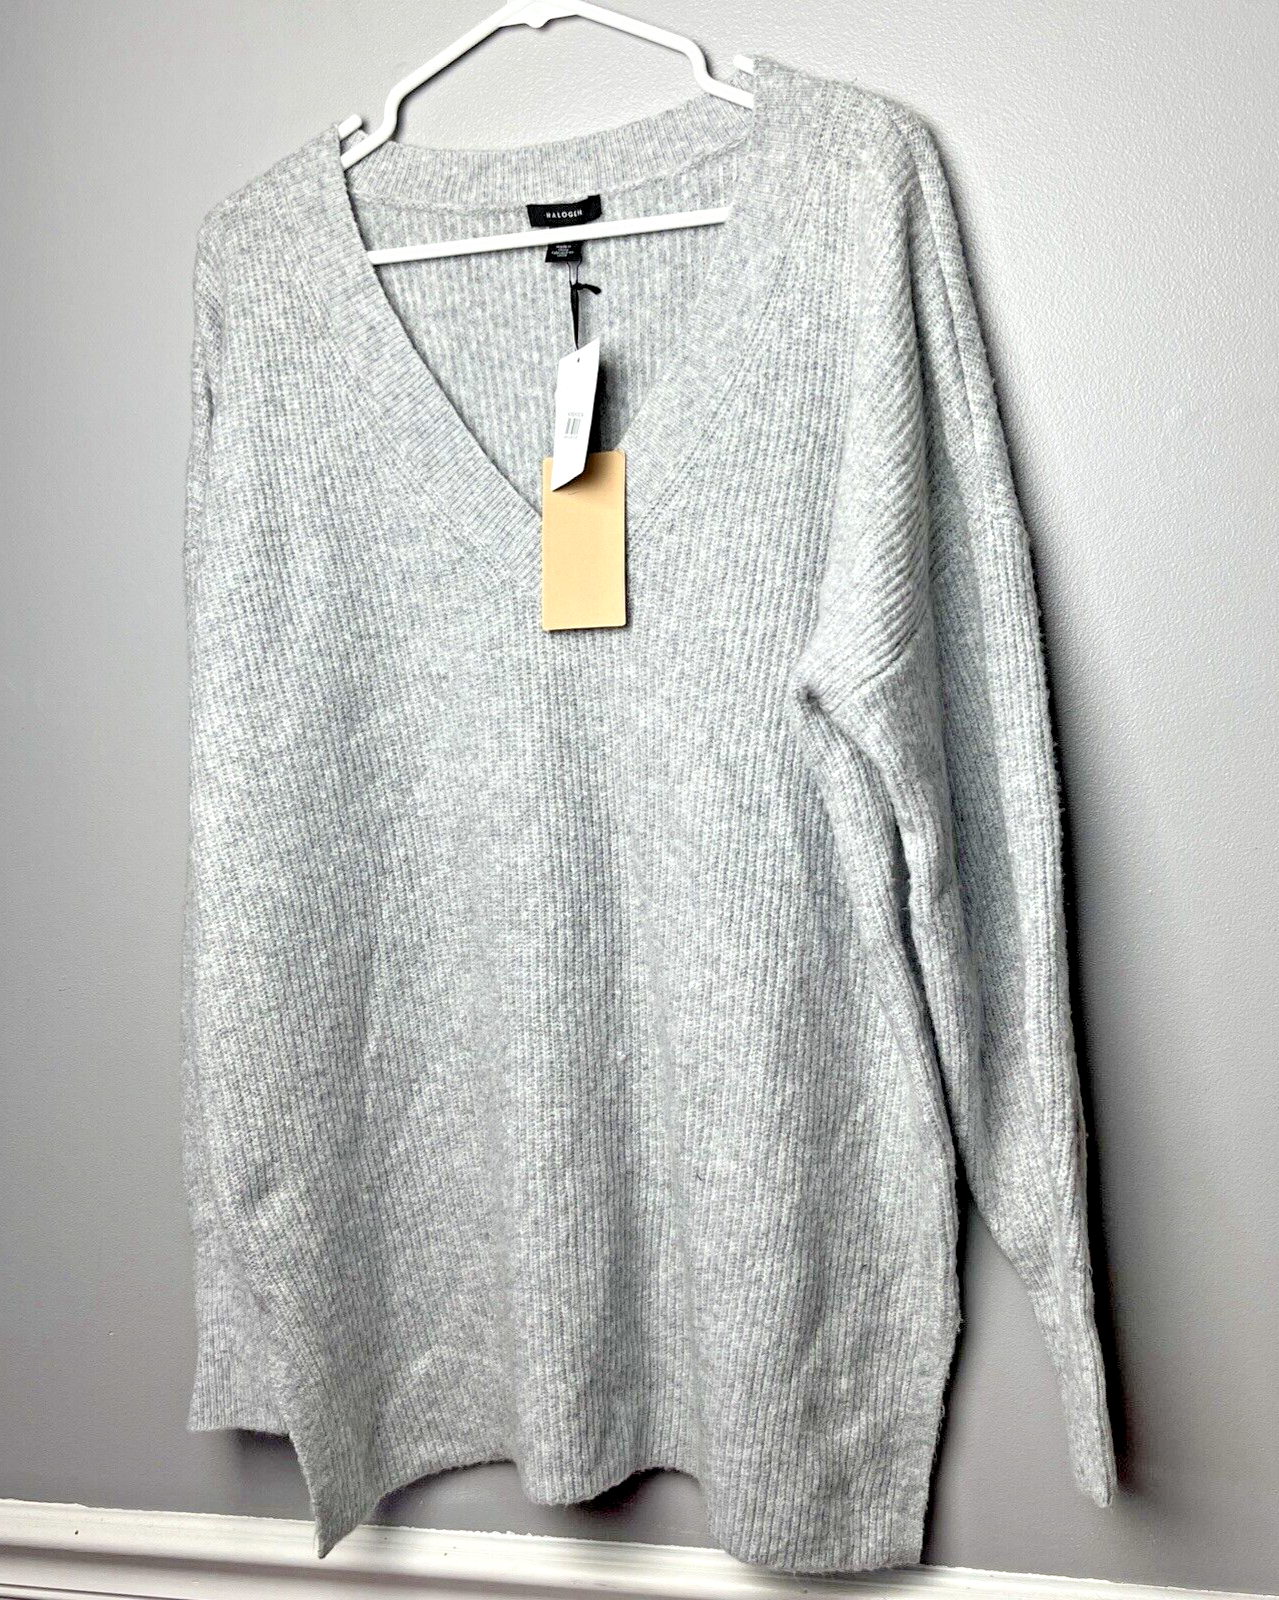 Halogen Cozy V-neck Tunic Sweater In Grey Light Heather L Large NEW